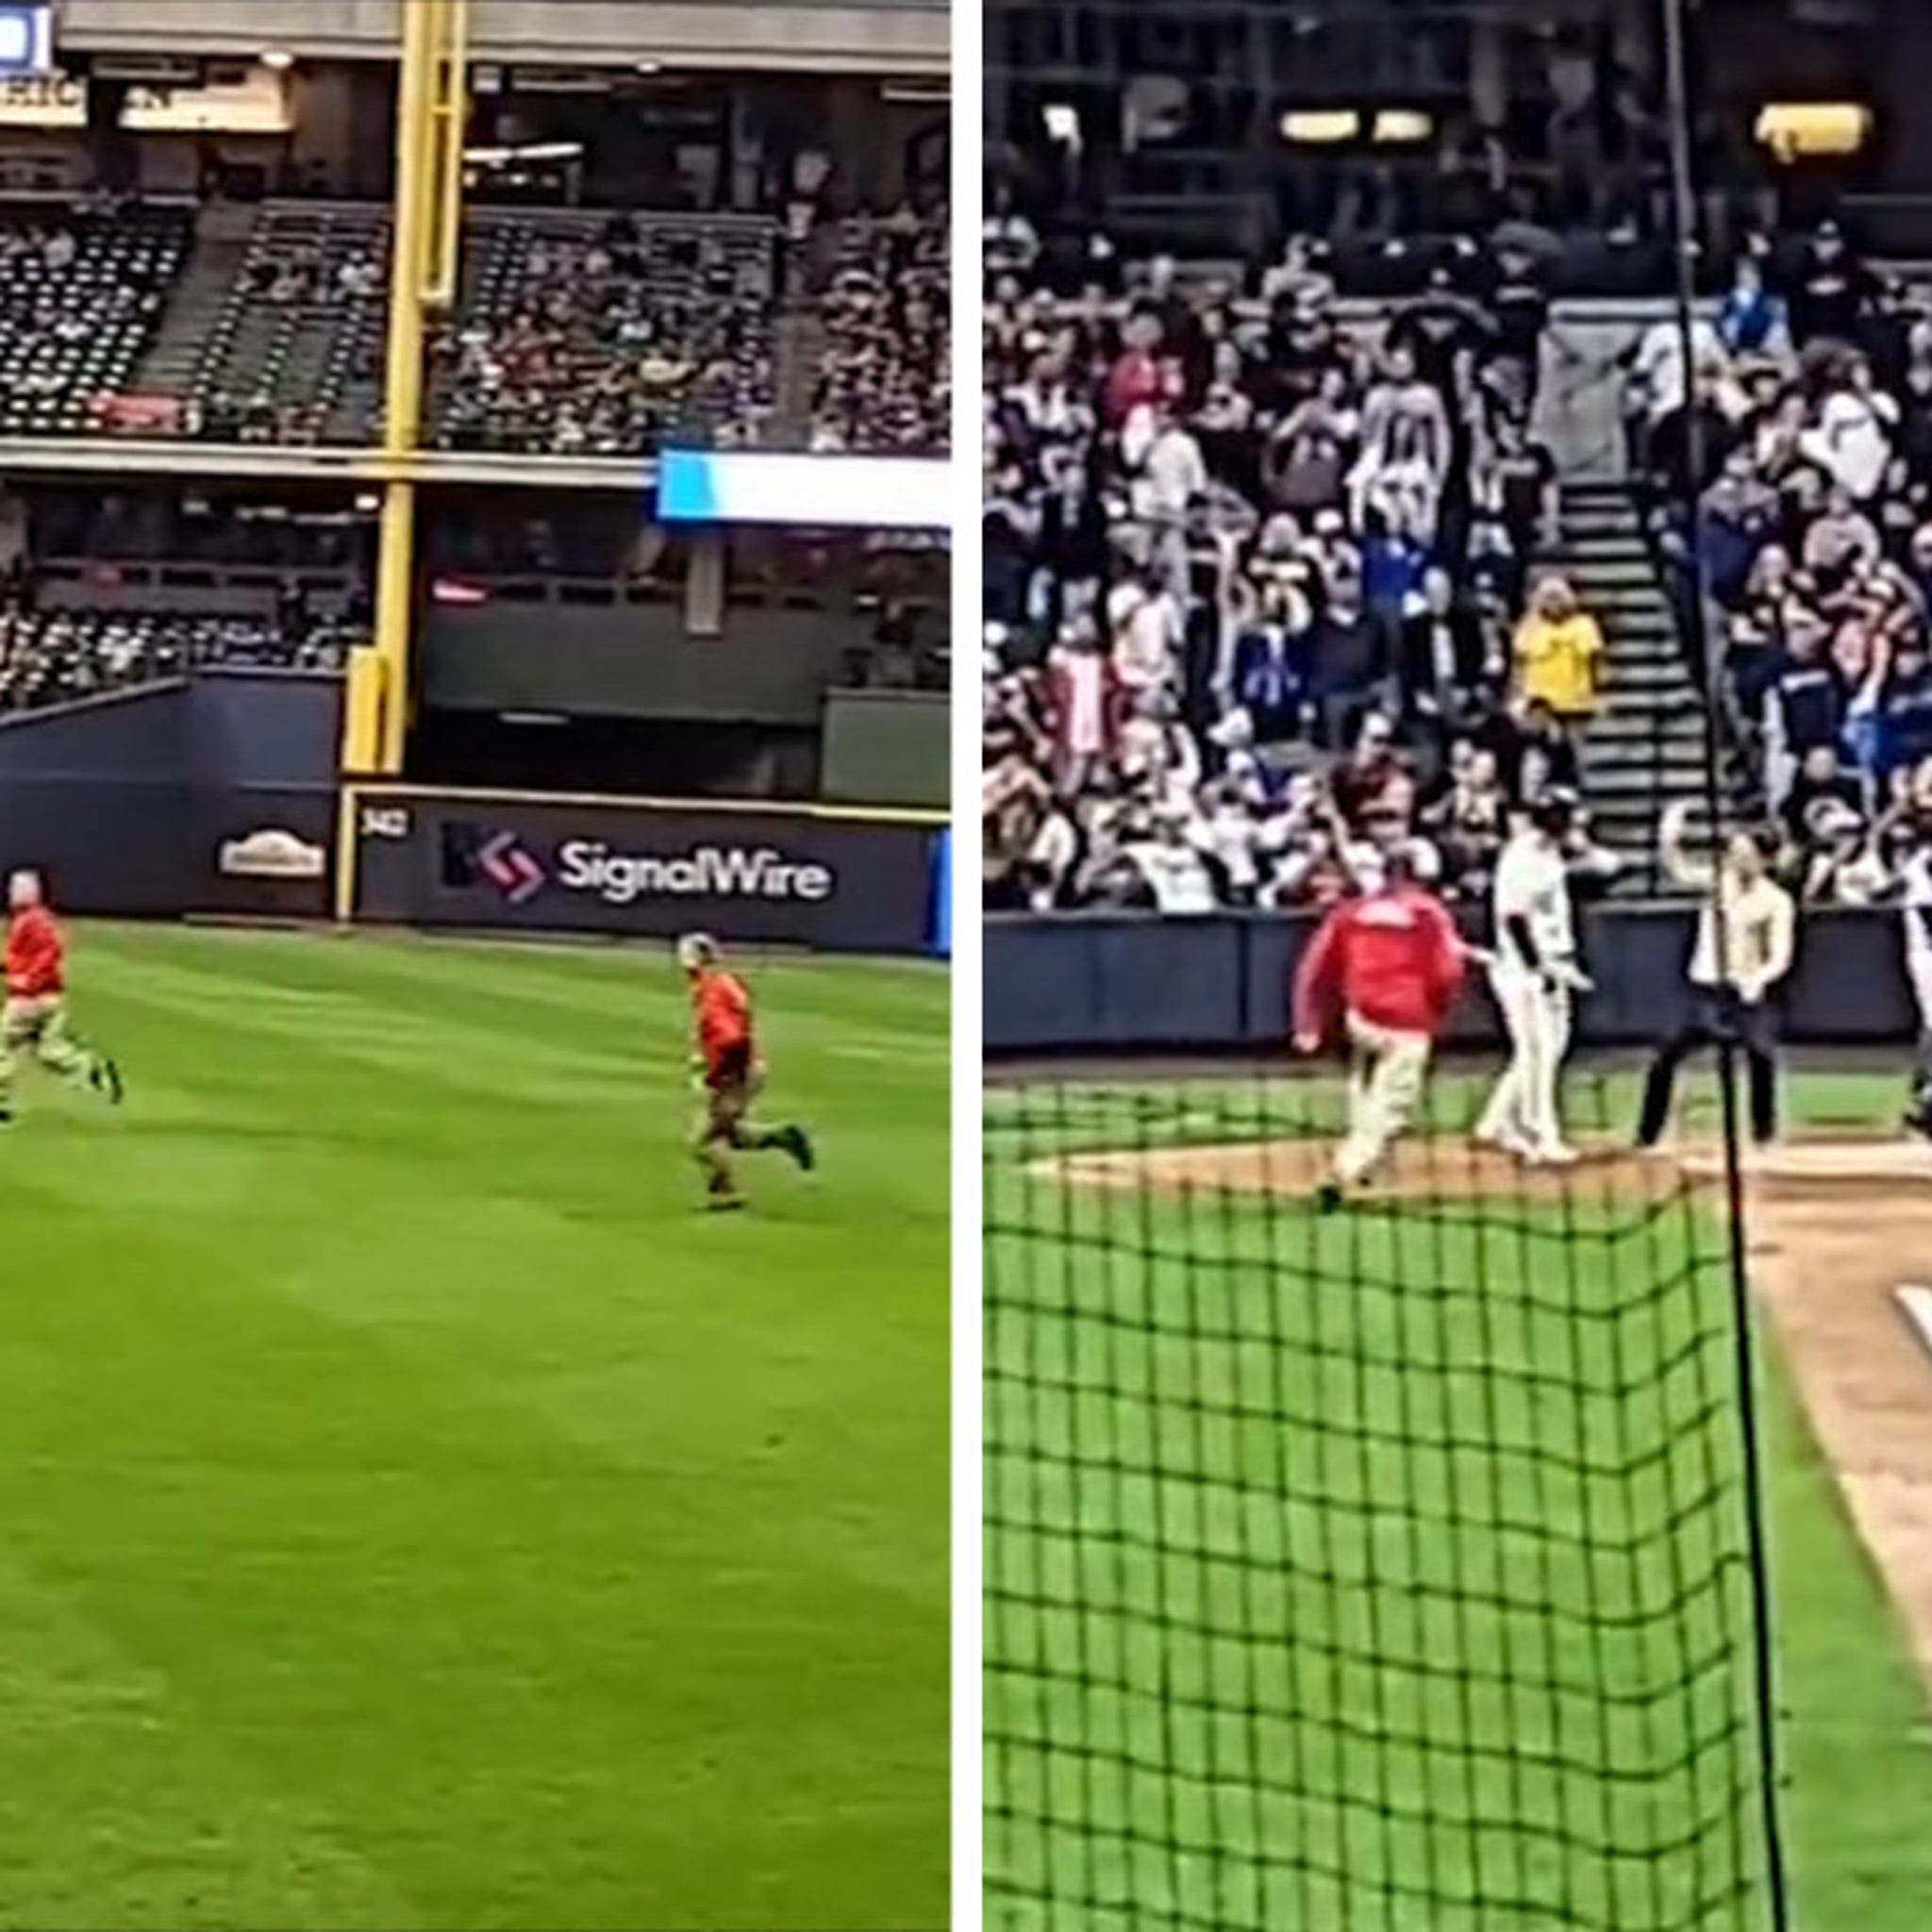 Fan Rushes Field, Outruns Security At Marlins Game, Later Gets Caught